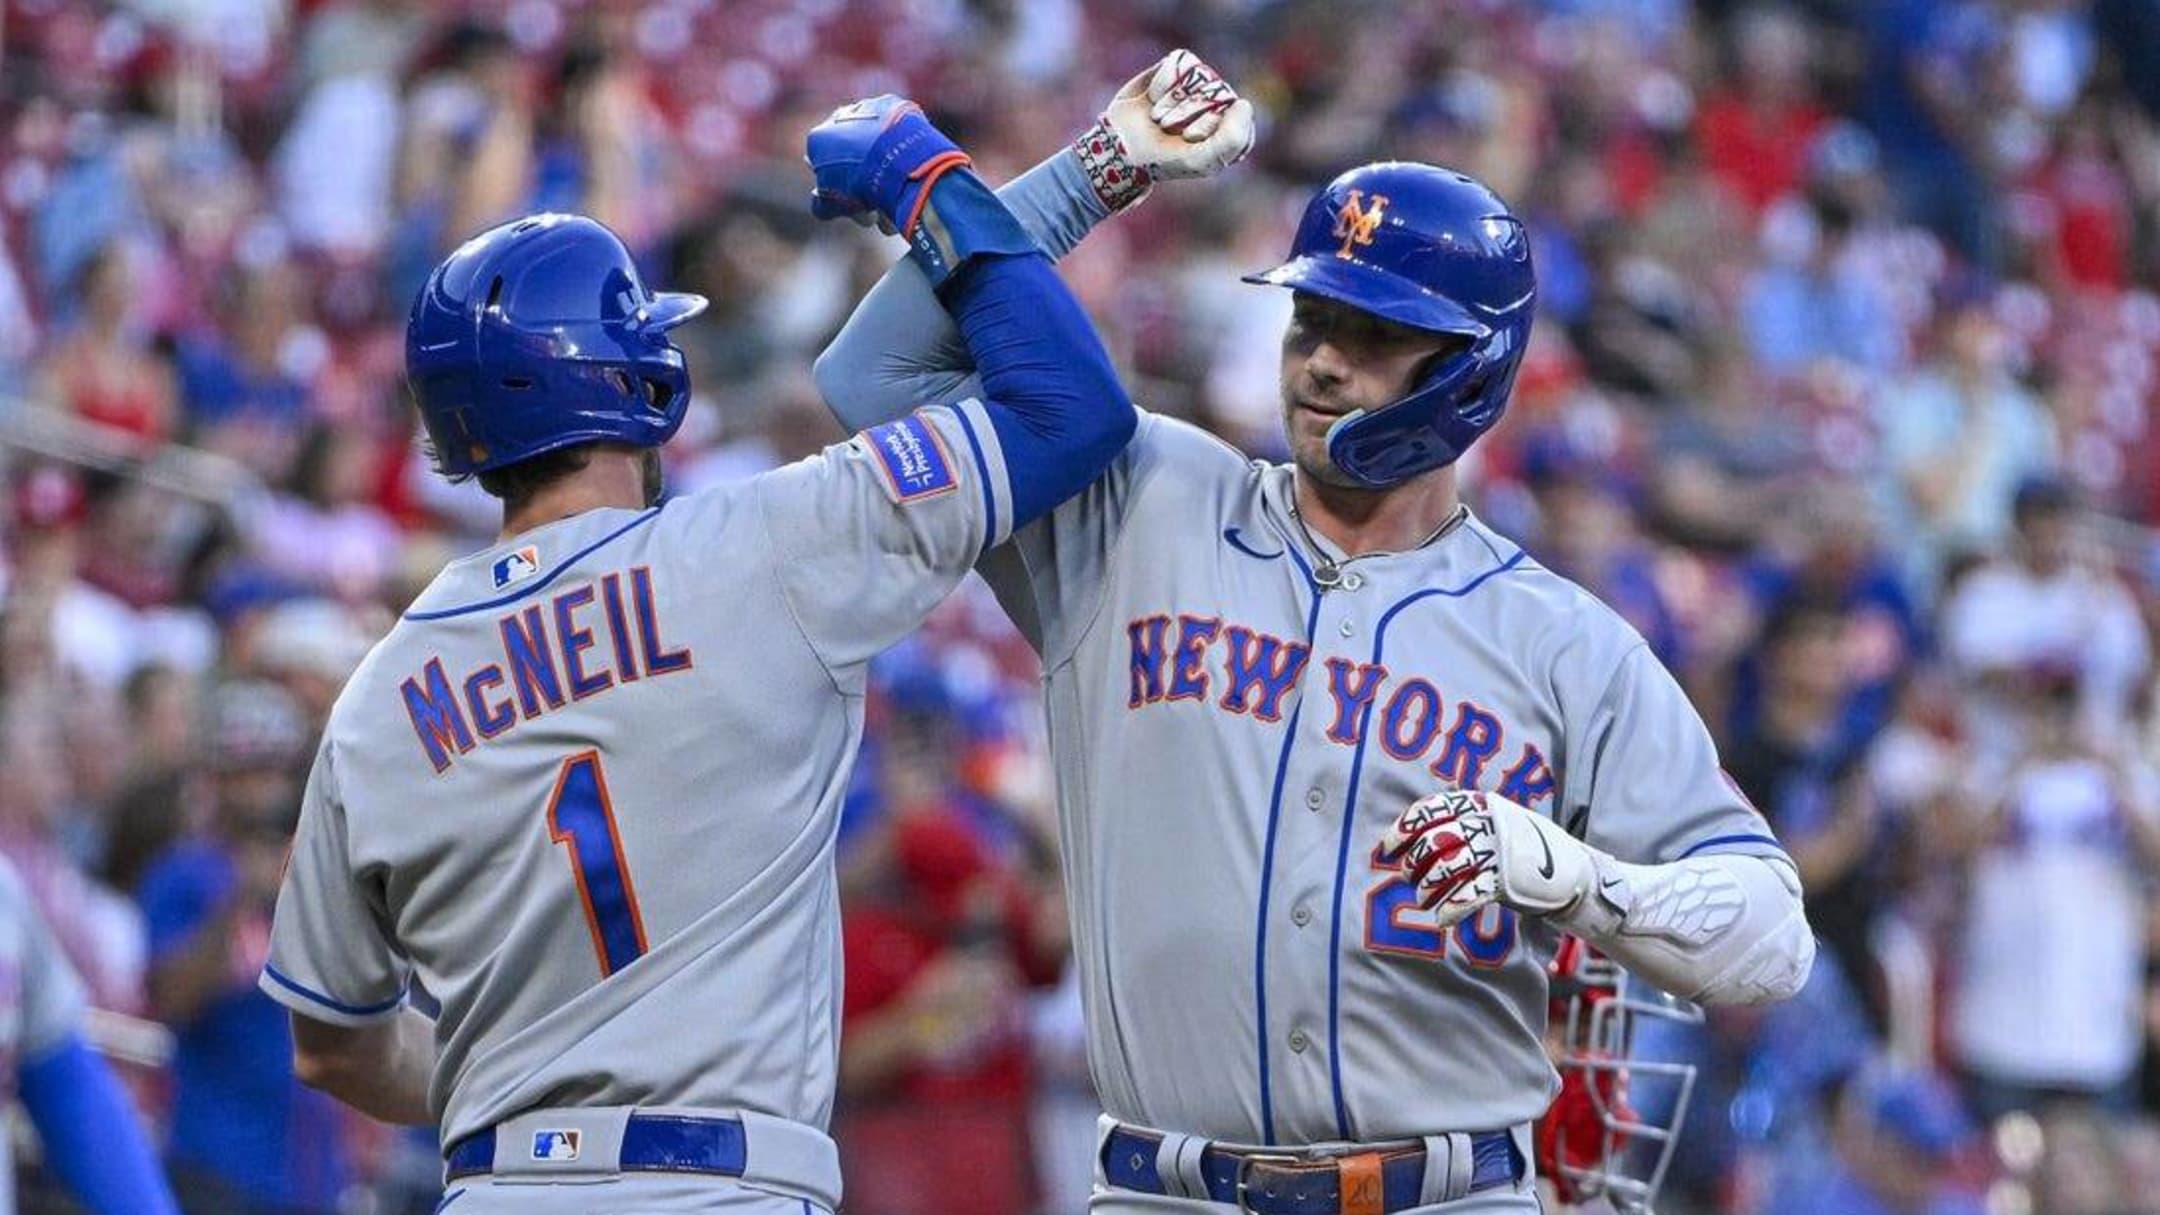 Mets' Pete Alonso goes yard twice in shutout out Jays